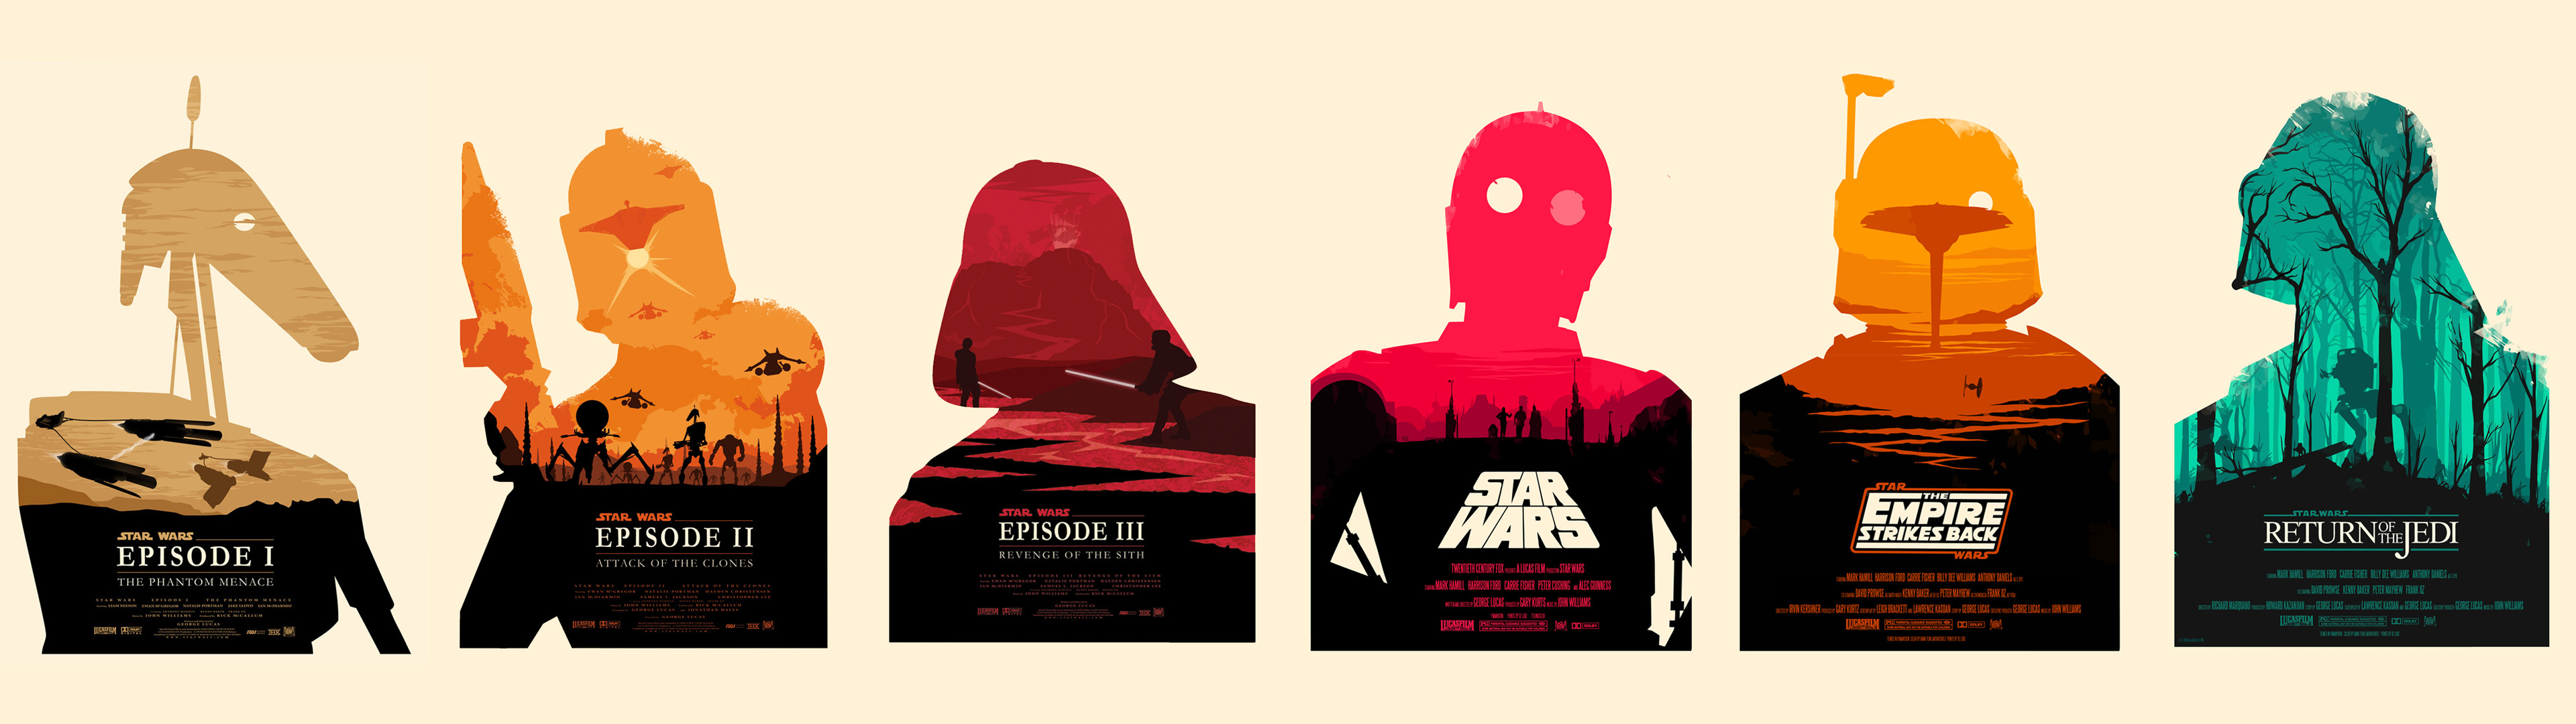 Dual monitor Star Wars posters [3840×1080] …